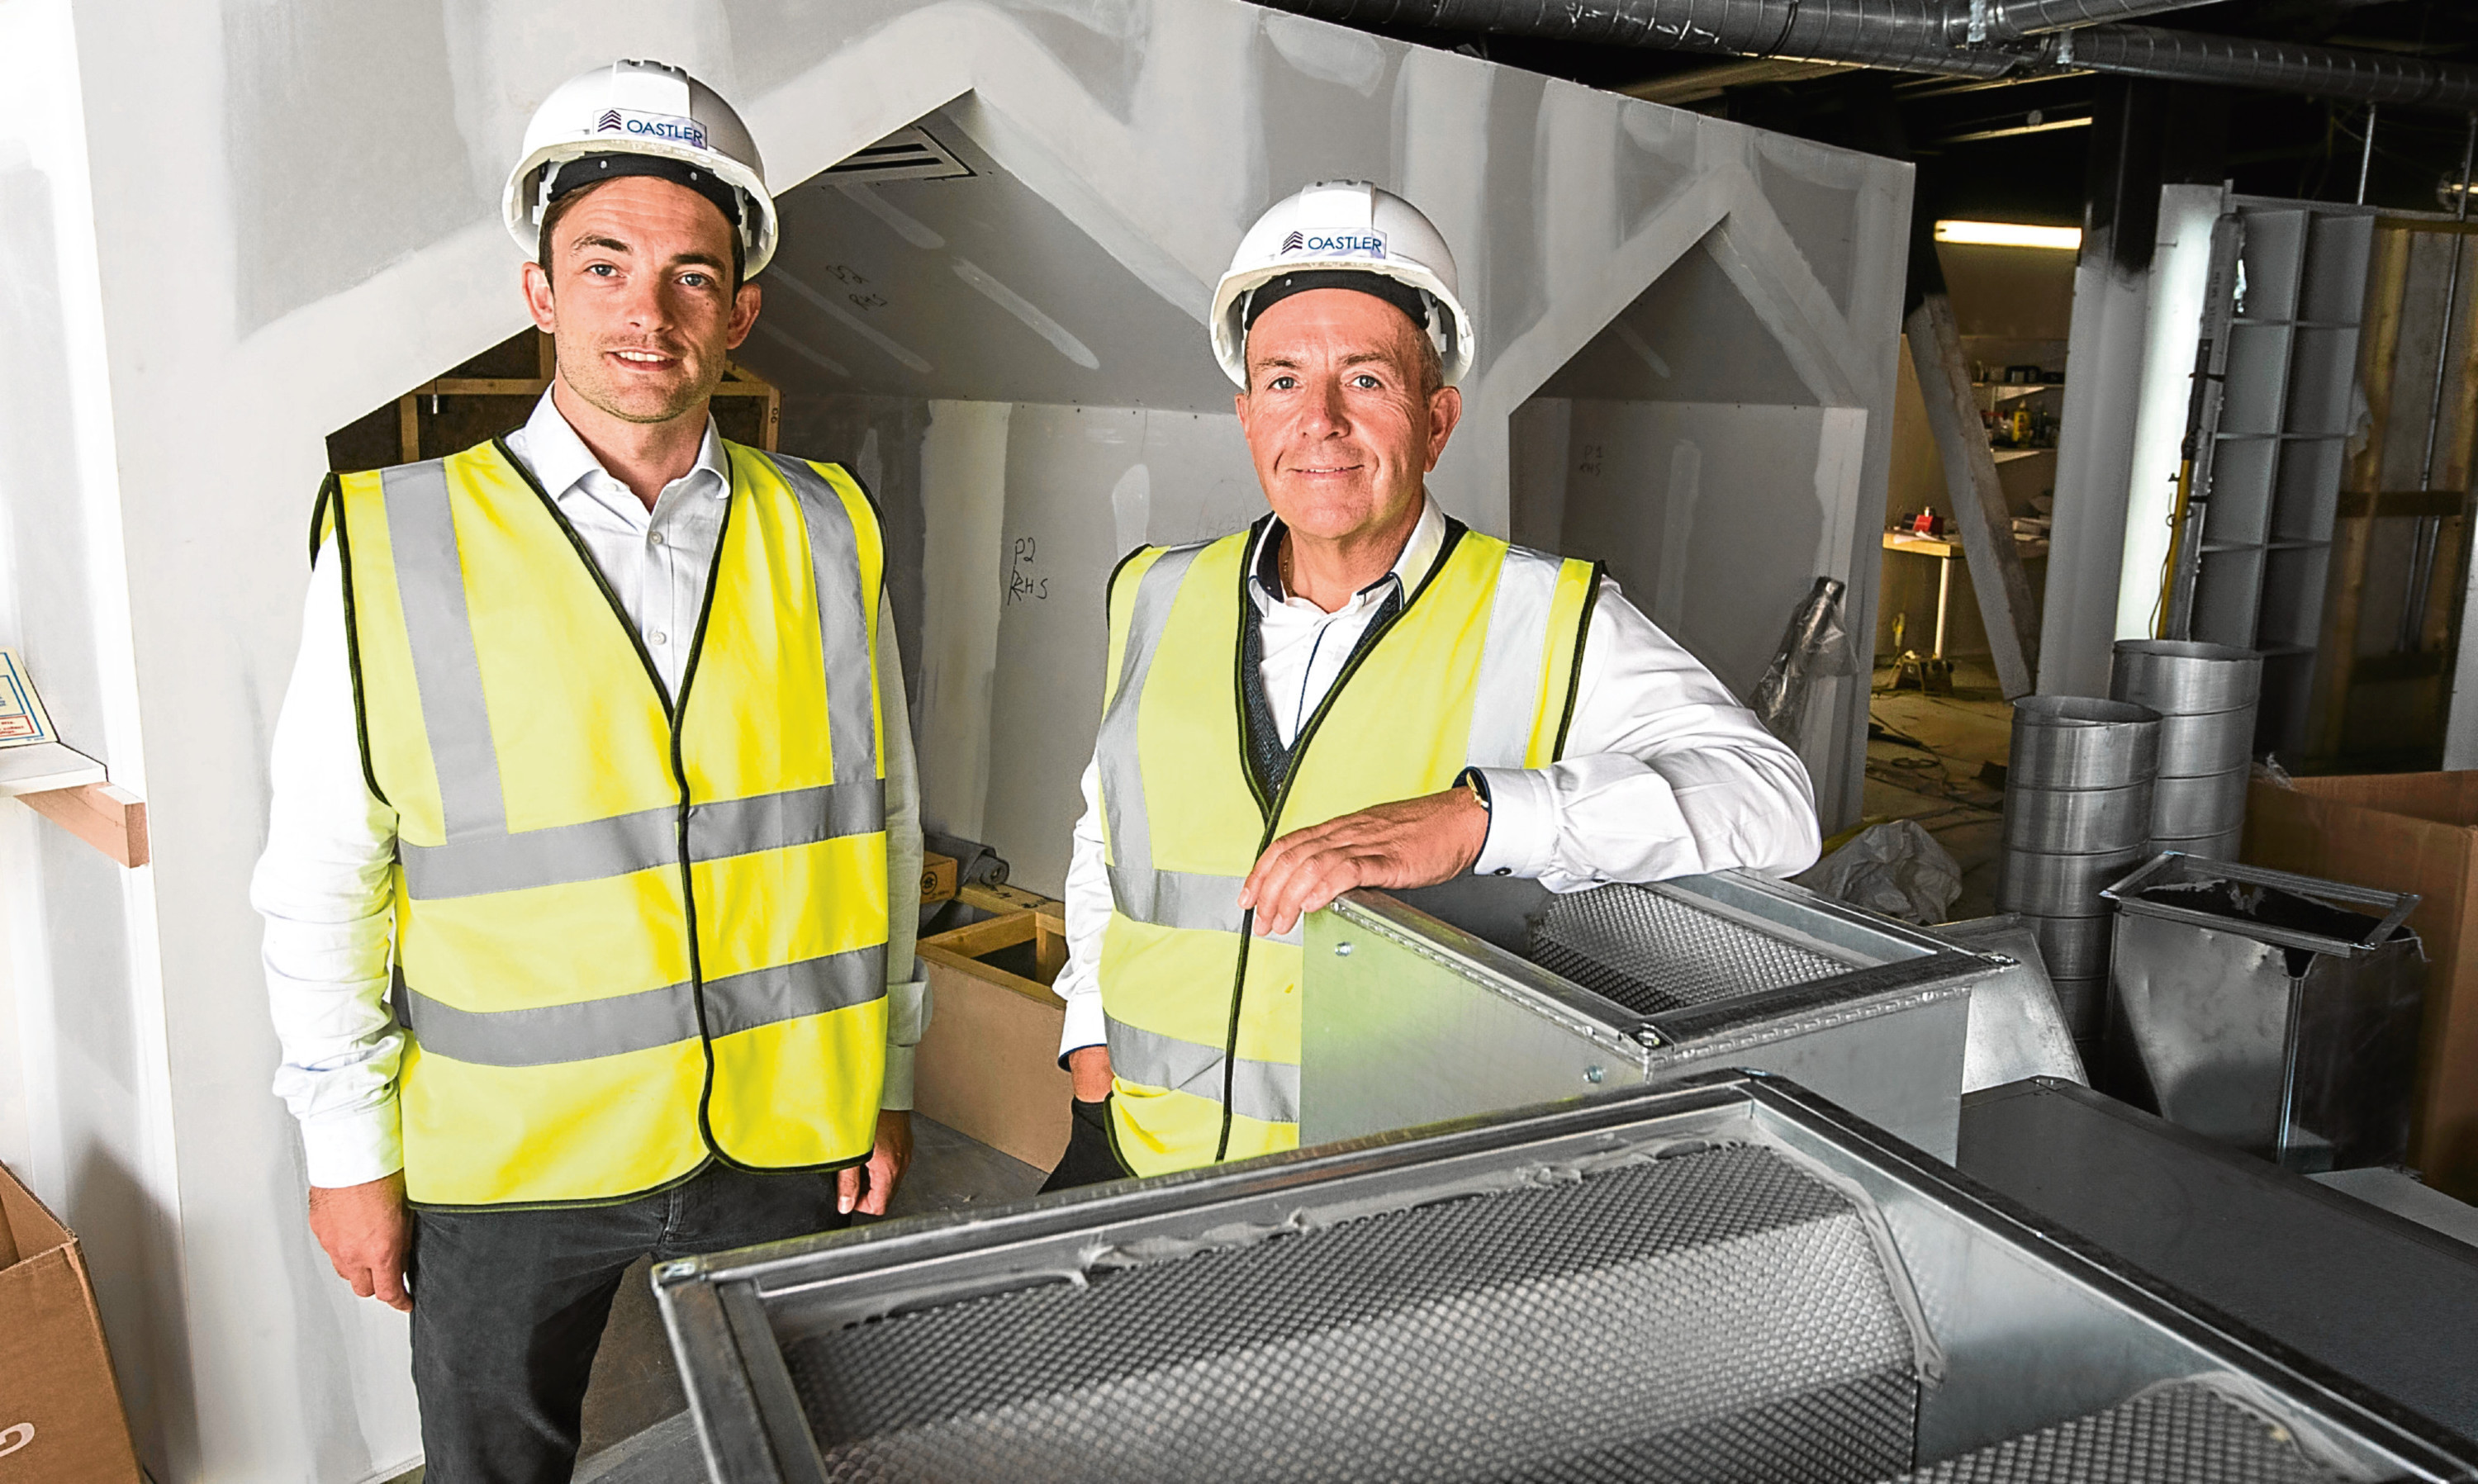 Brian McNicoll, enterprise and entrepreneurship manager at Dundee University with Professor Gary McEwan at the soon-to-be completed Elevator hub in Dundee.